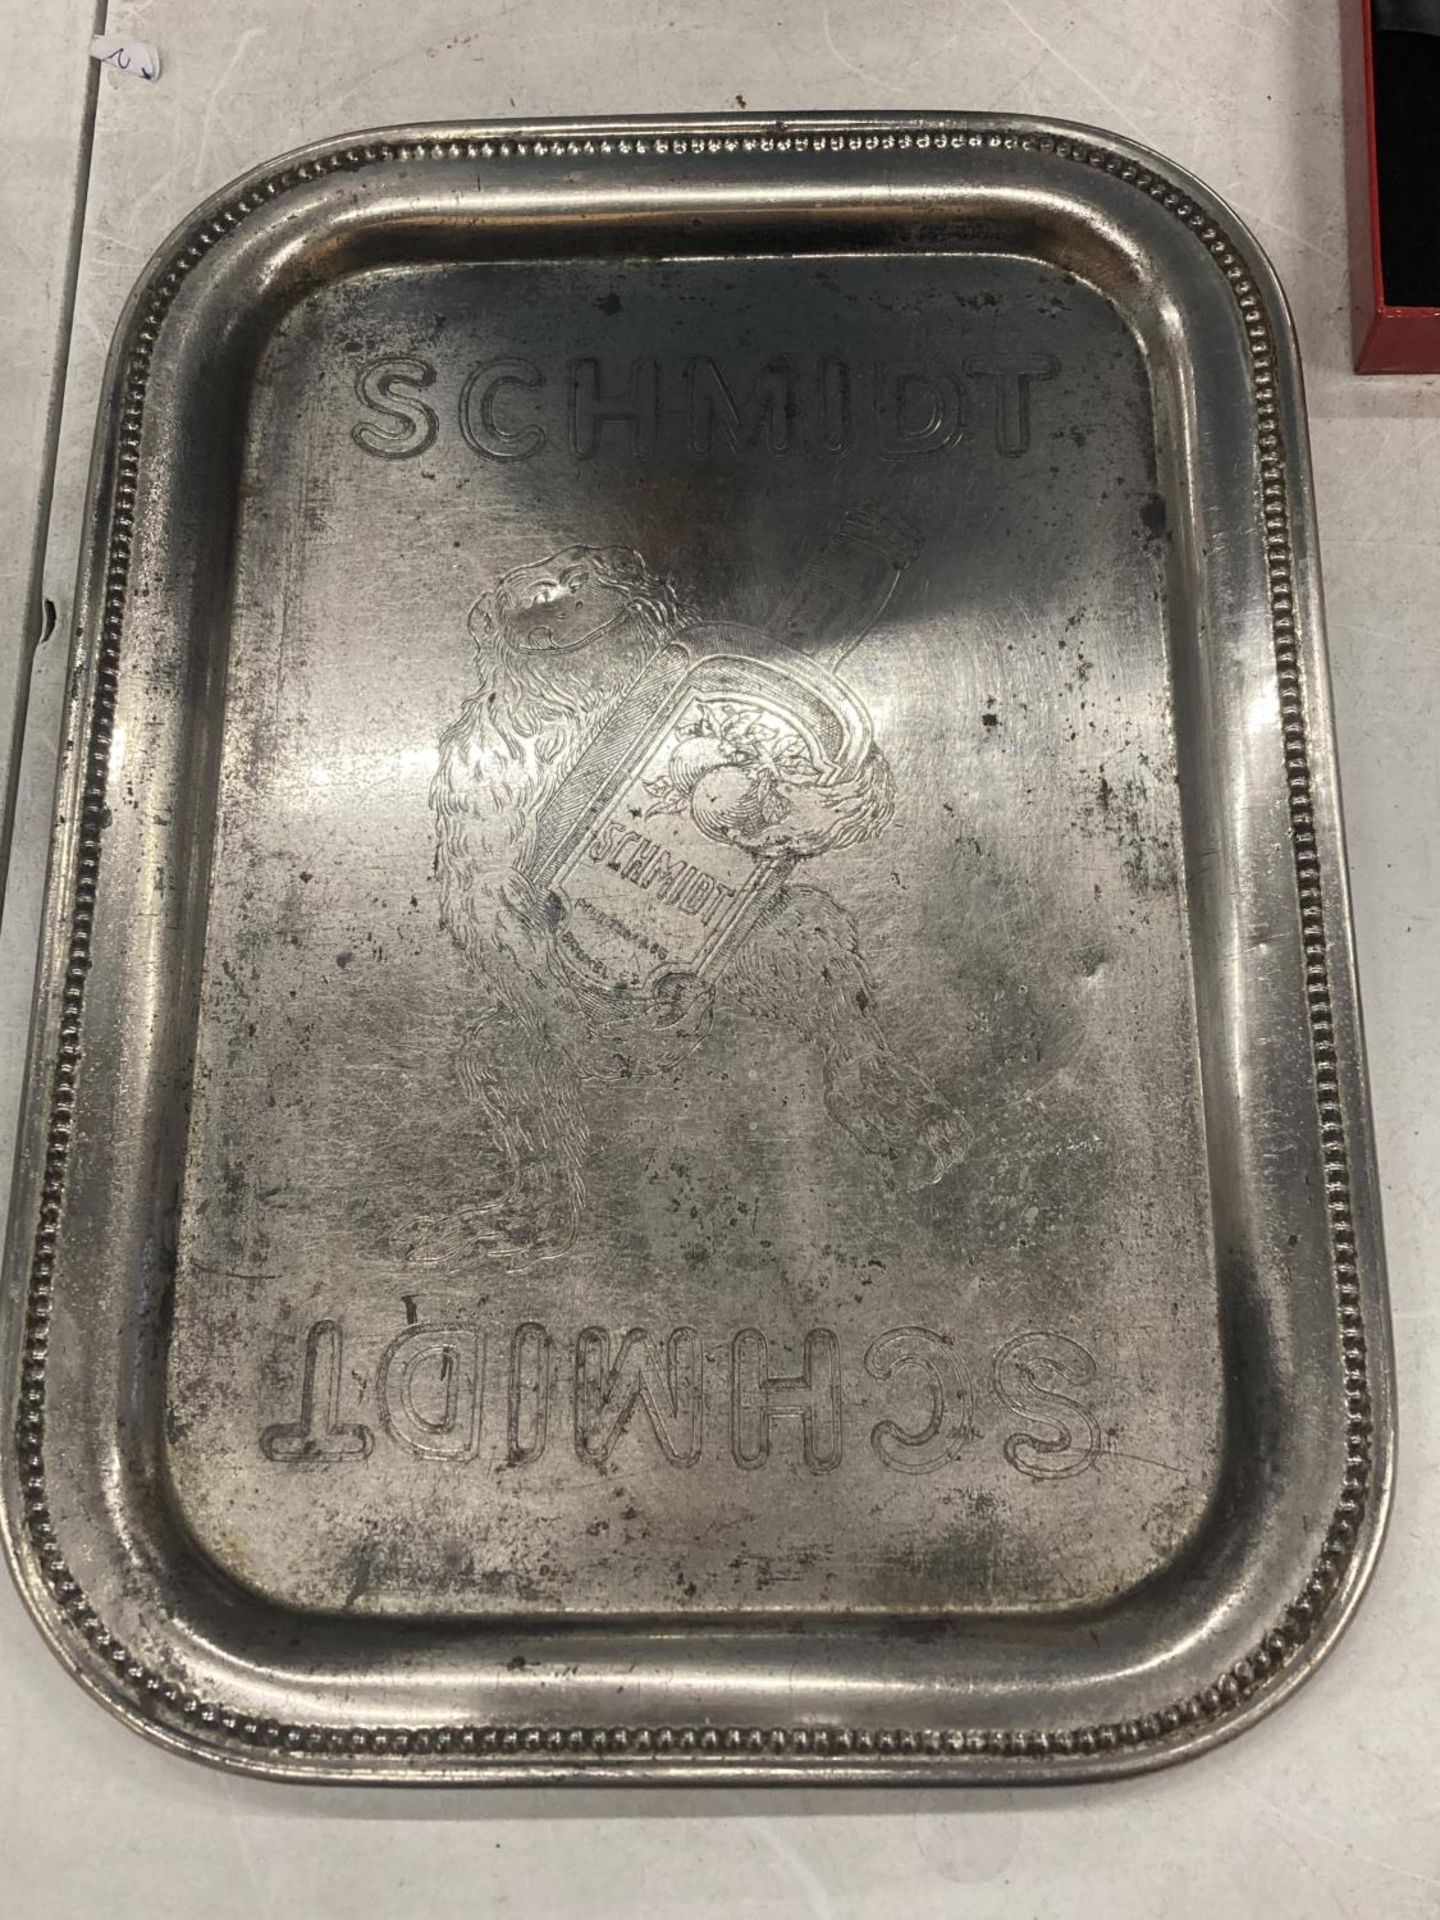 A VINTAGE SCHMIDT BEER TRAY BRUSSELS WITH YETI LOGO